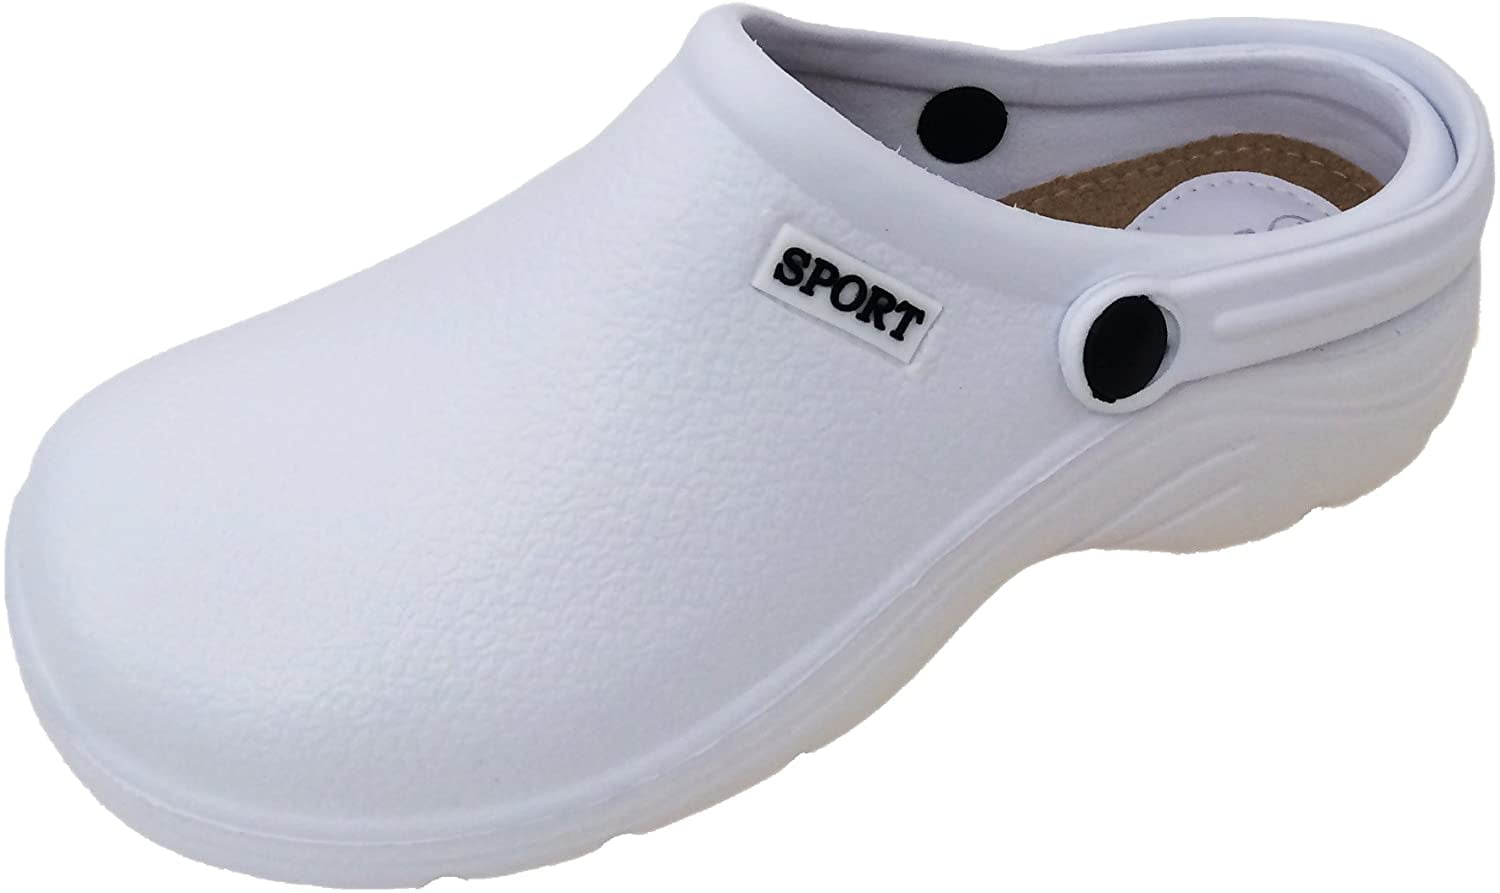 Womens Closed Toe White Clogs Hospital Gardening Kitchen Slip On Mule Shoes 